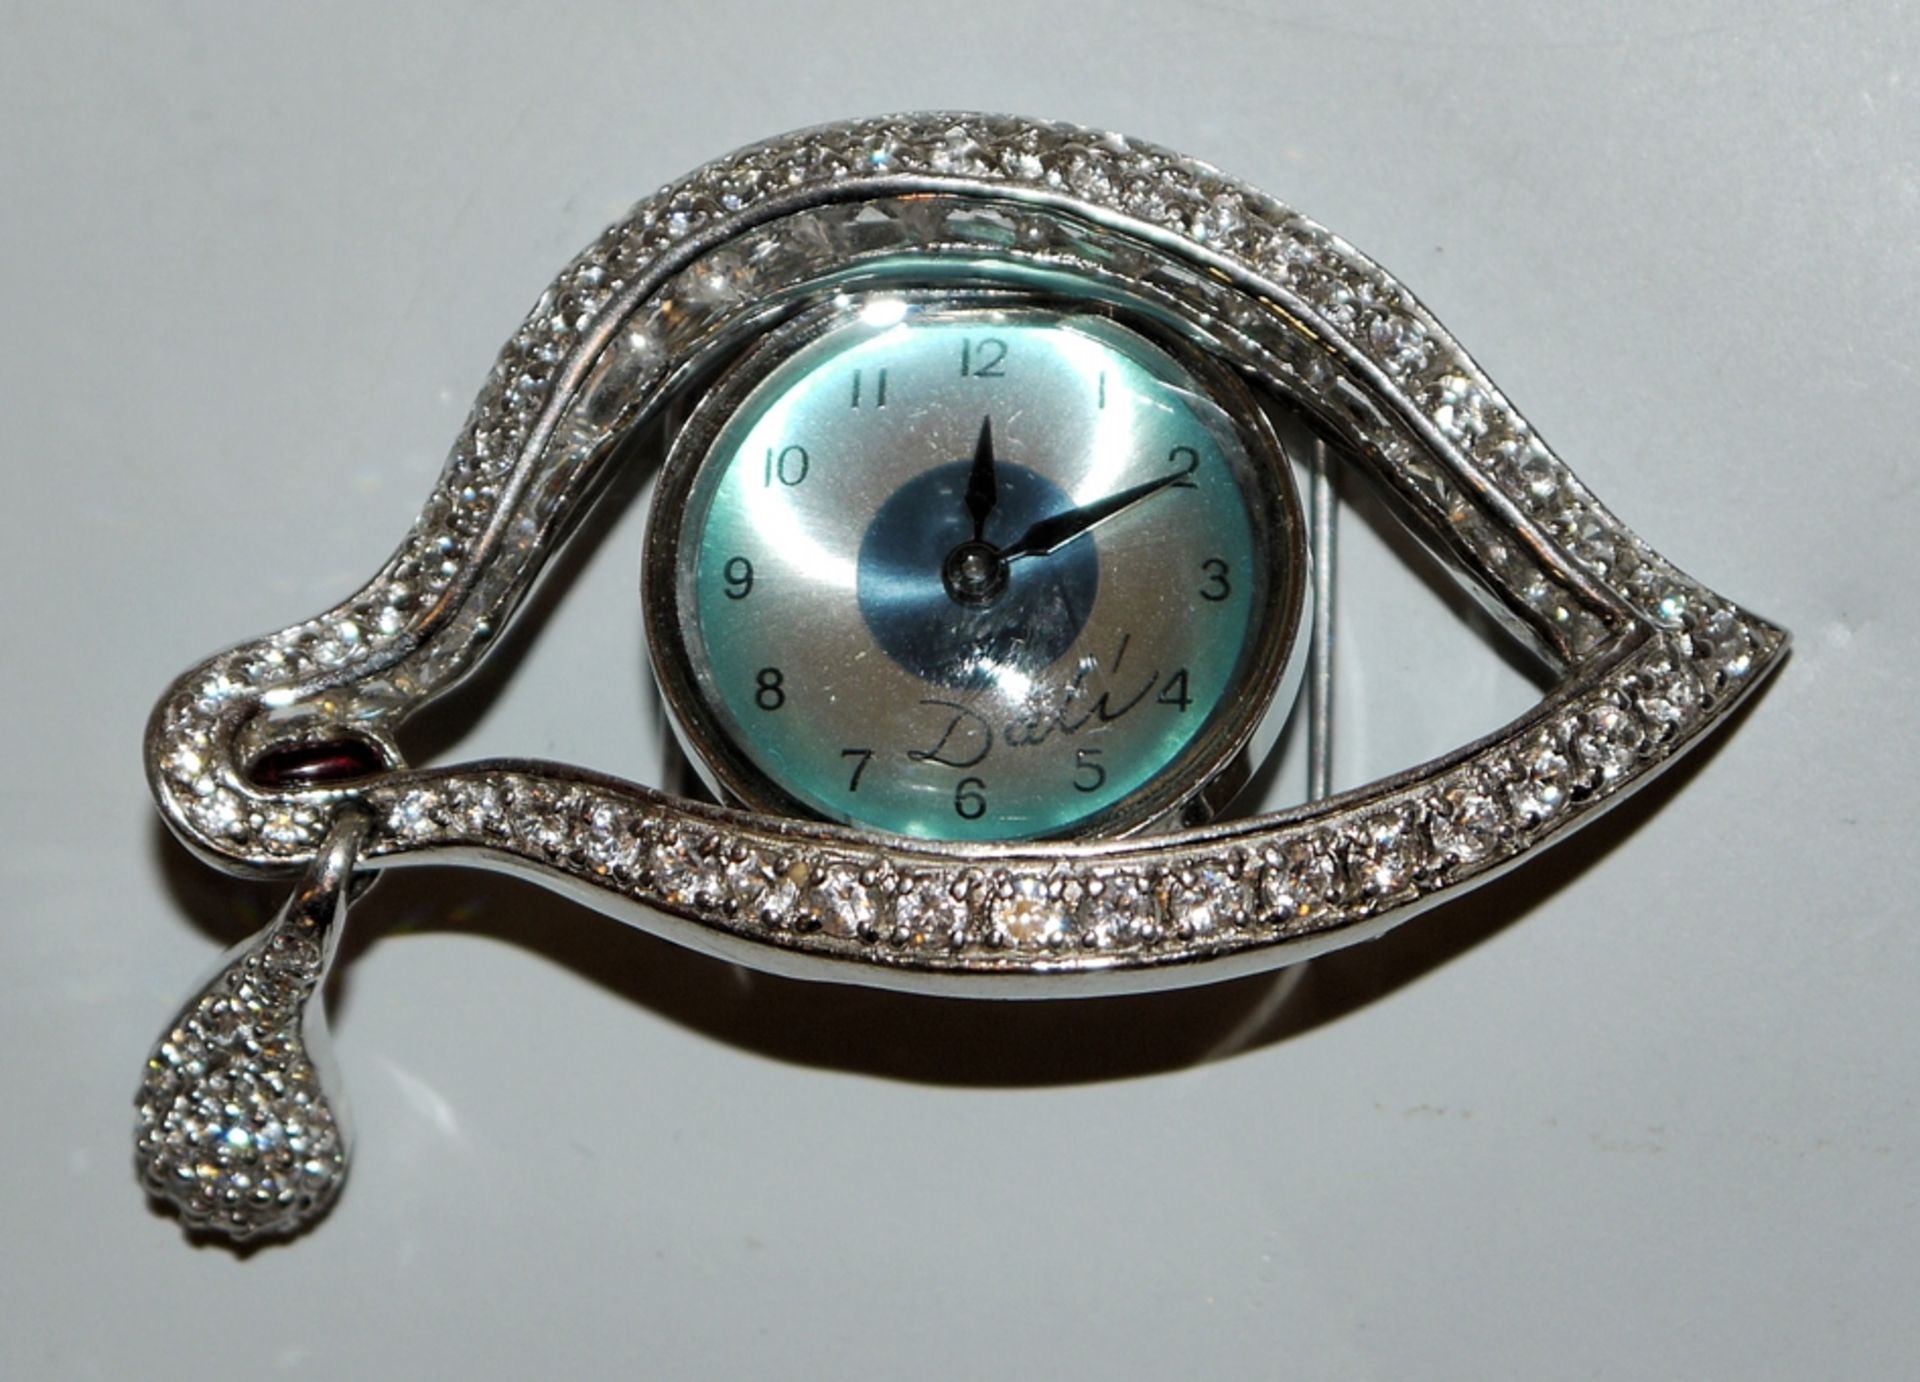 "Joia l'Ull del Temps (Eye of Time)"- Watch brooch, Dalí Joies, Figueres, 2003, limited edition, si